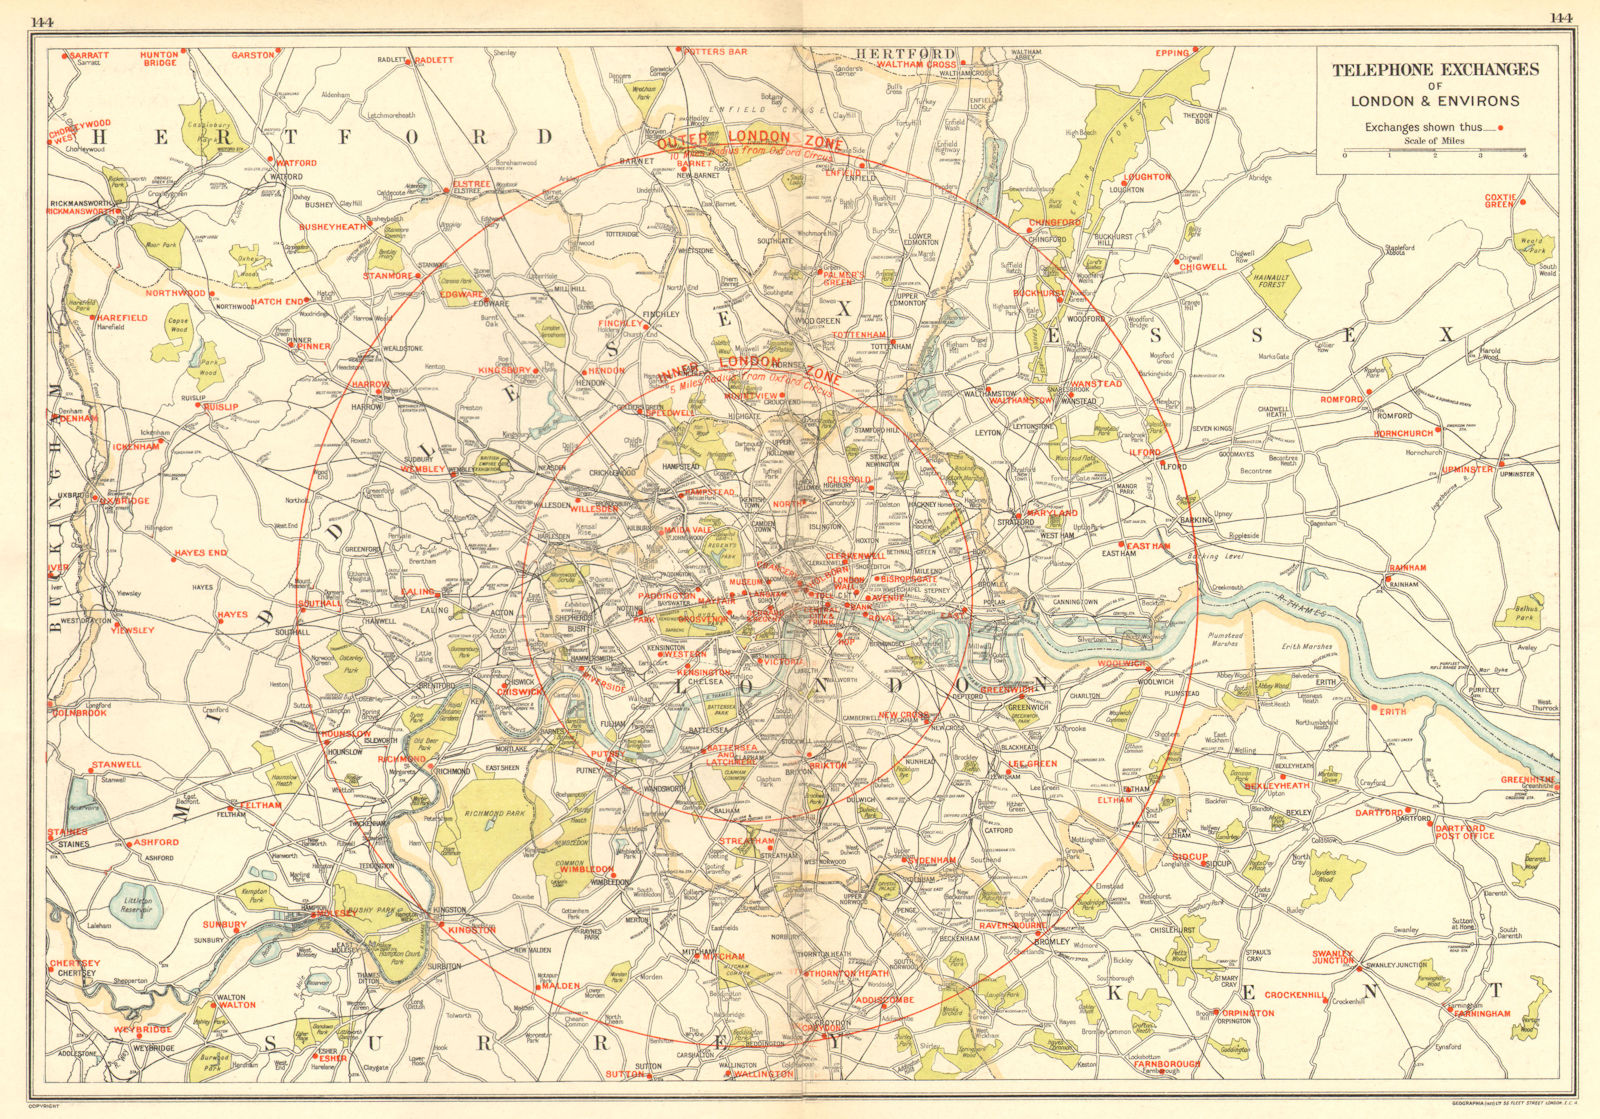 Associate Product LONDON. Telephone Exchanges of London & Environs 1923 old vintage map chart